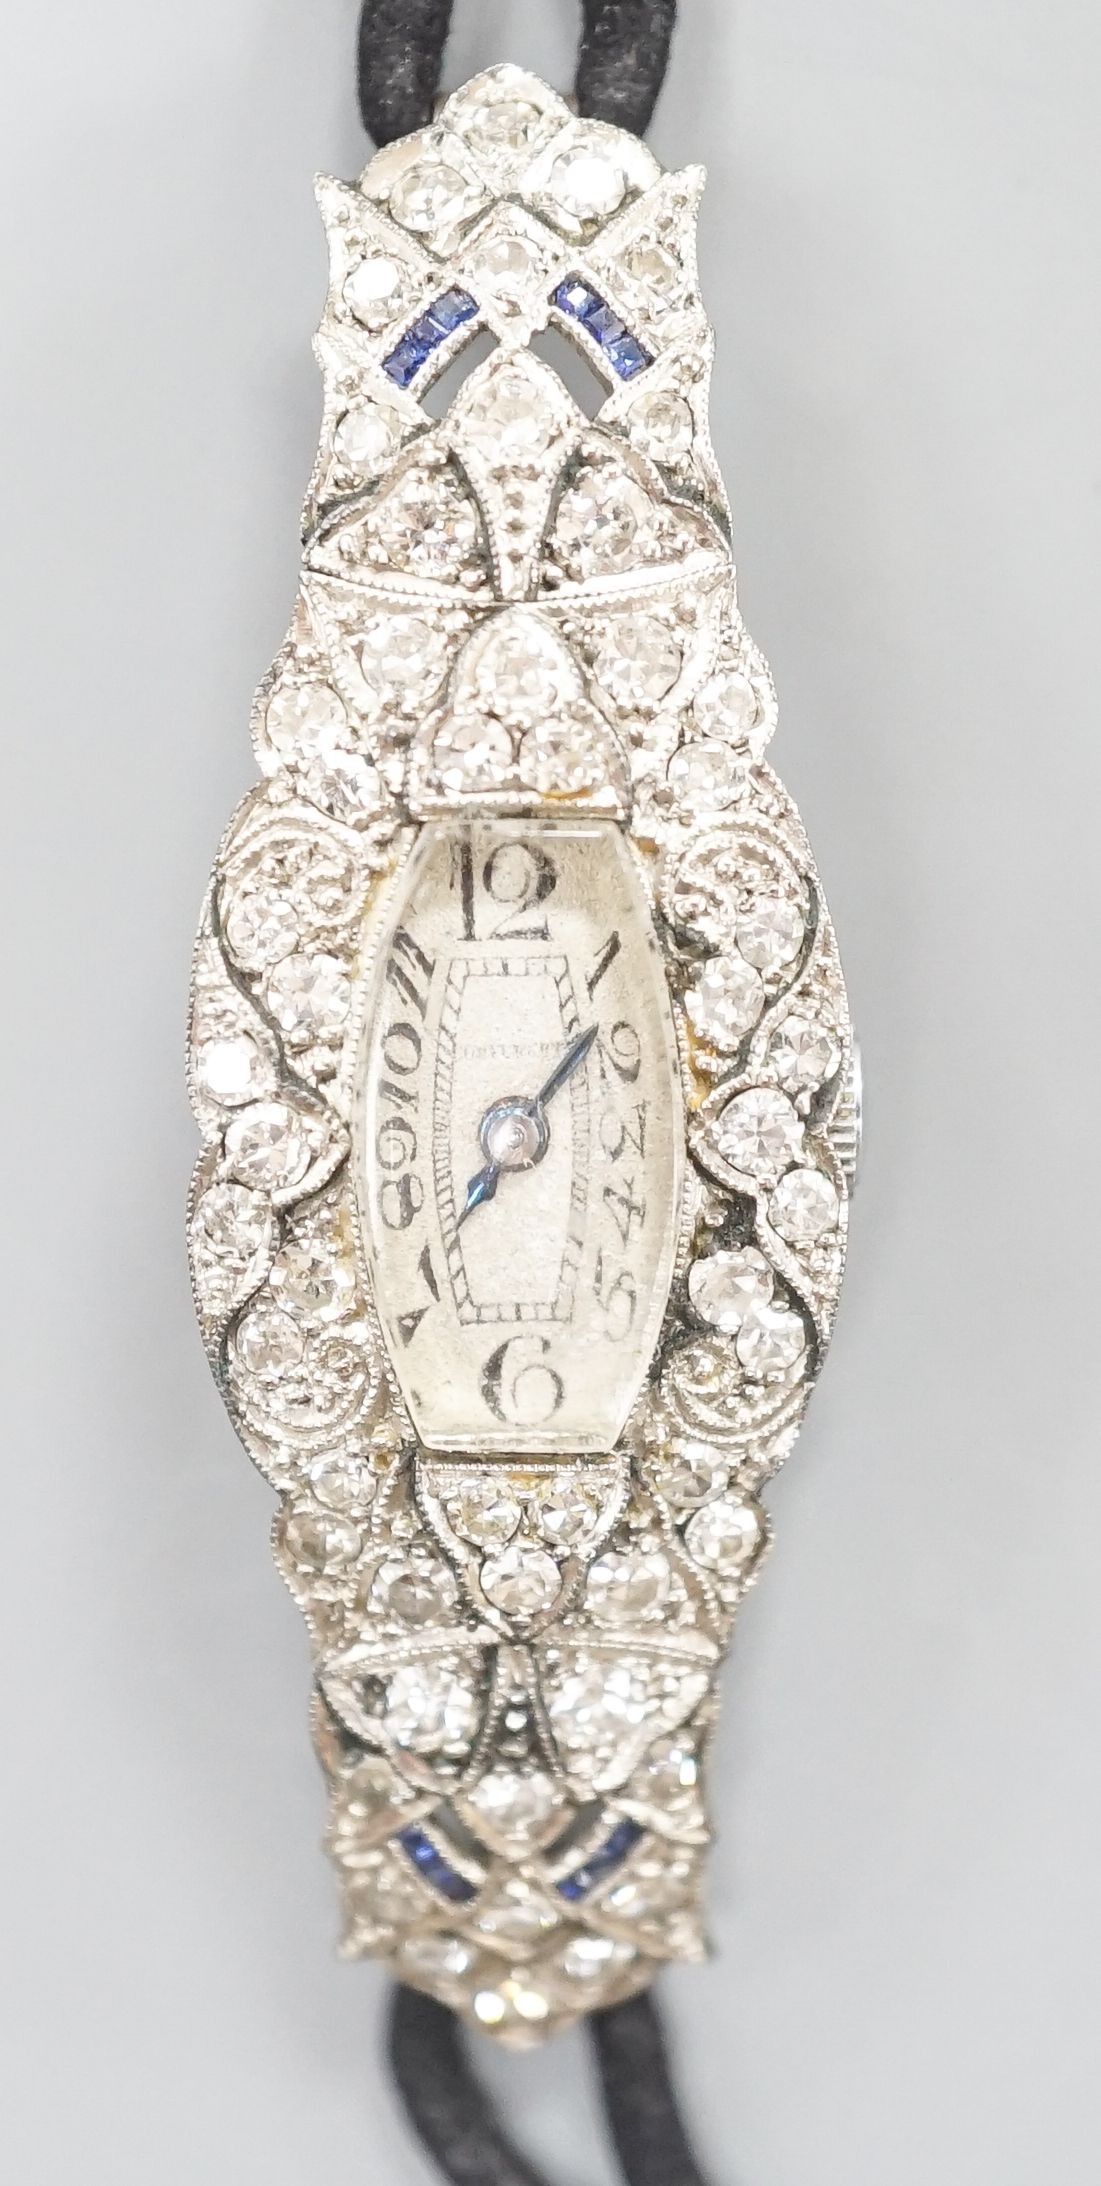 A lady's mid 20th century engraved white metal, diamond and sapphire set cocktail watch, case diameter 17mm, gross weight 18.3 grams, on a later? twin strand fabric strap.